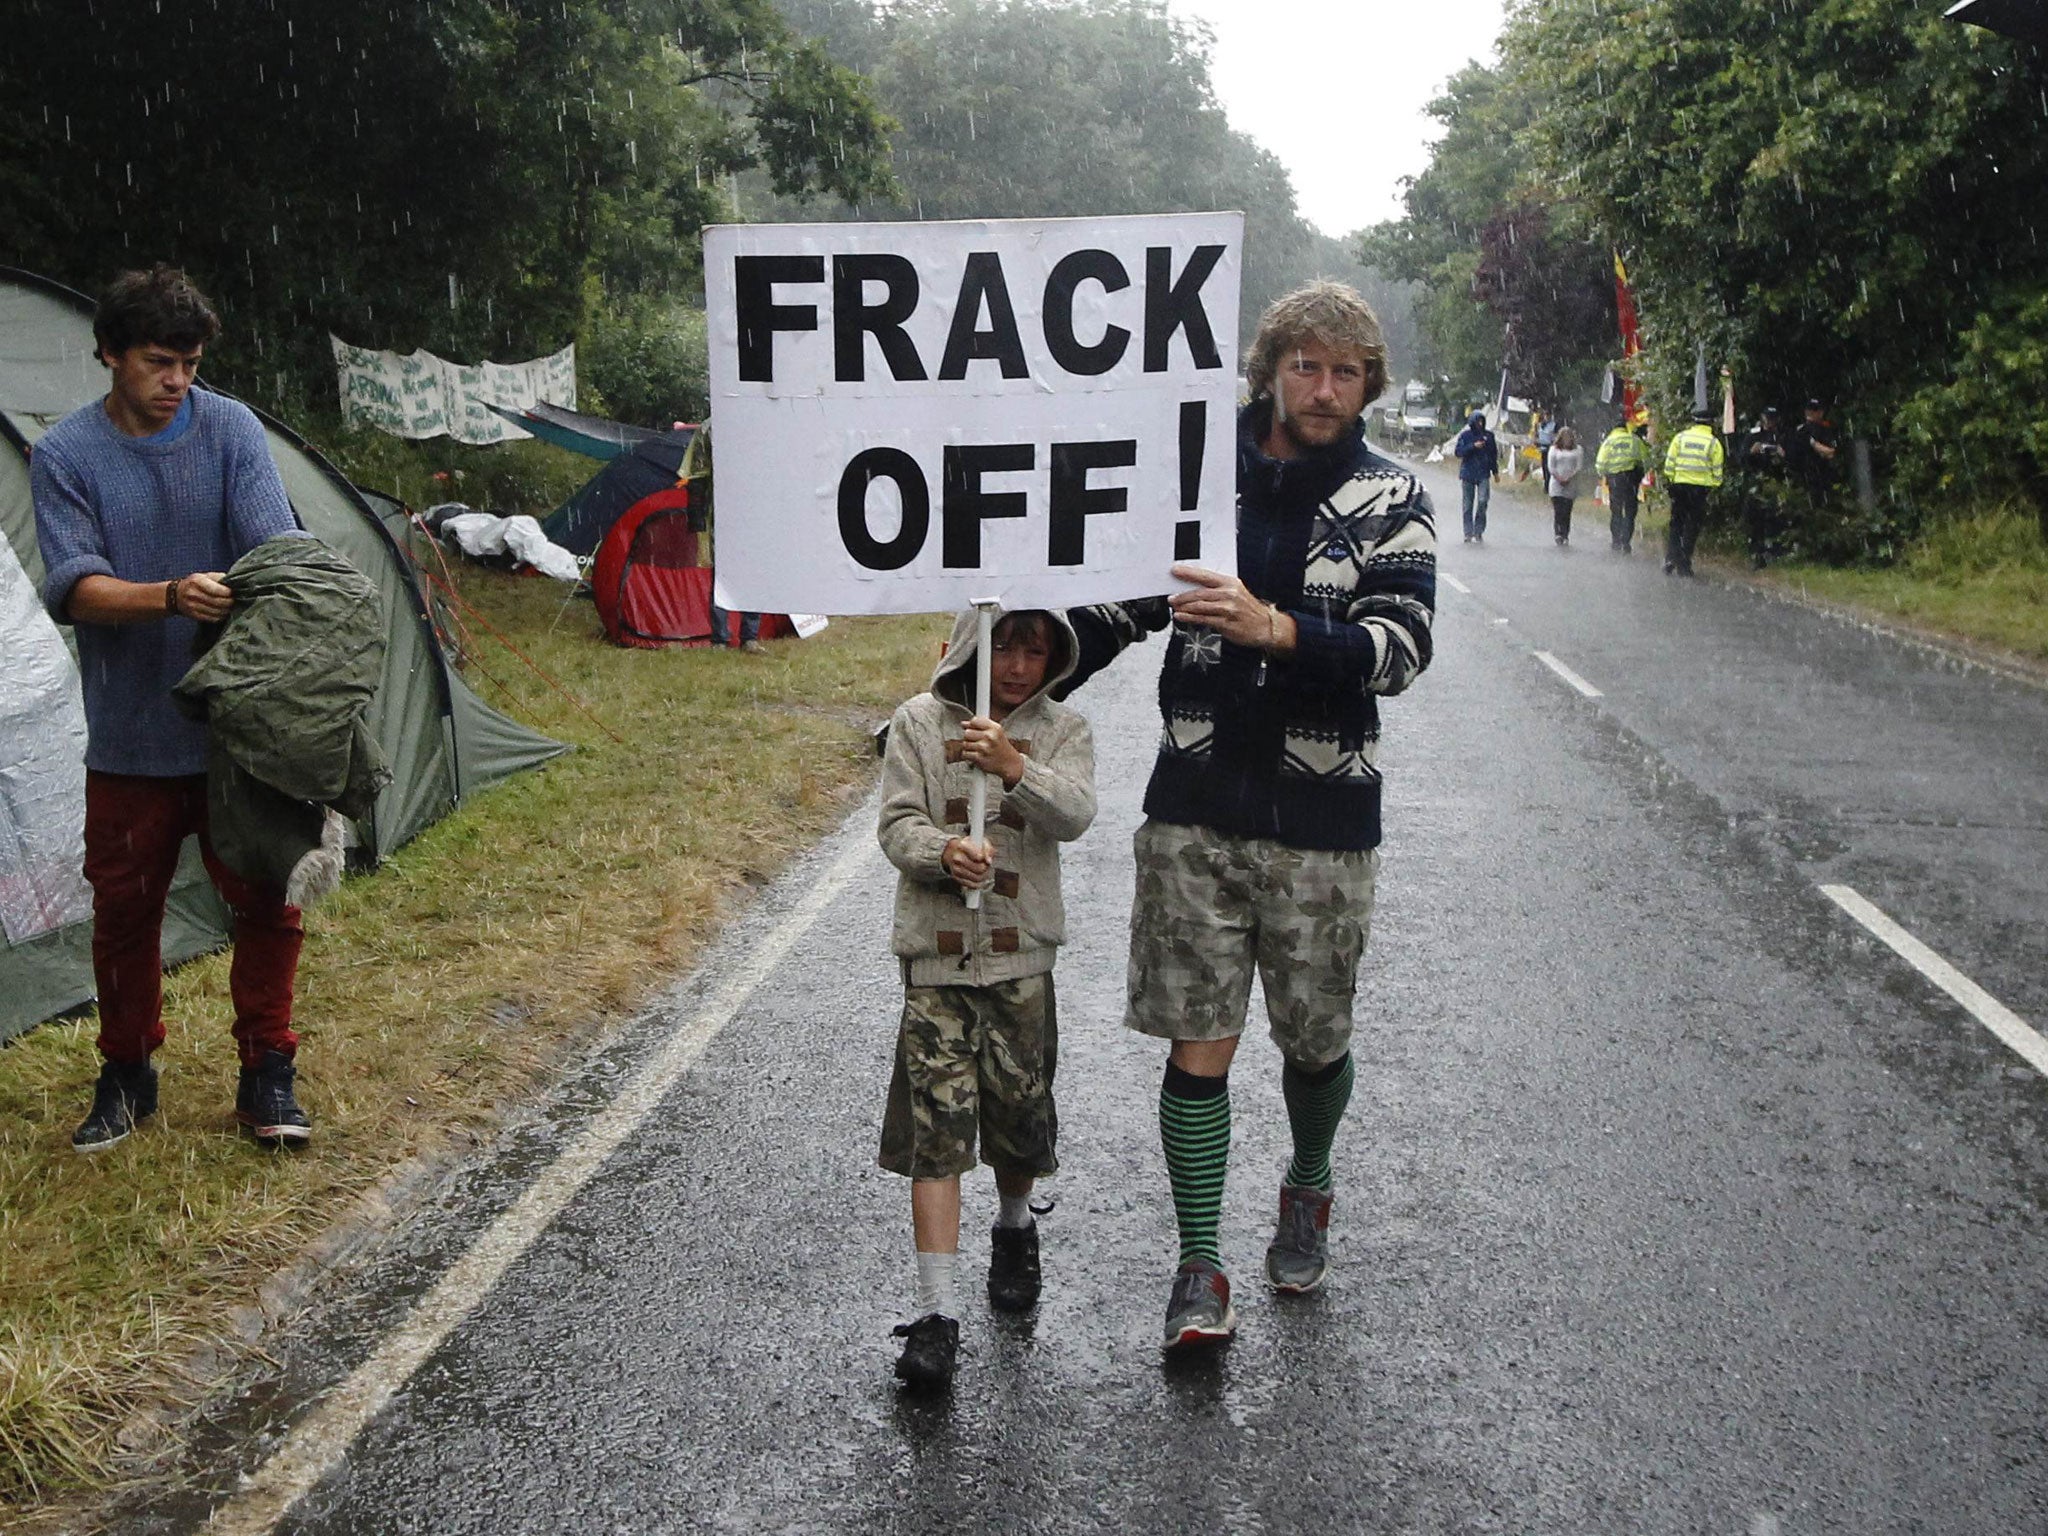 A man and boy walk through the rain with a placard during an anti-fracking protest